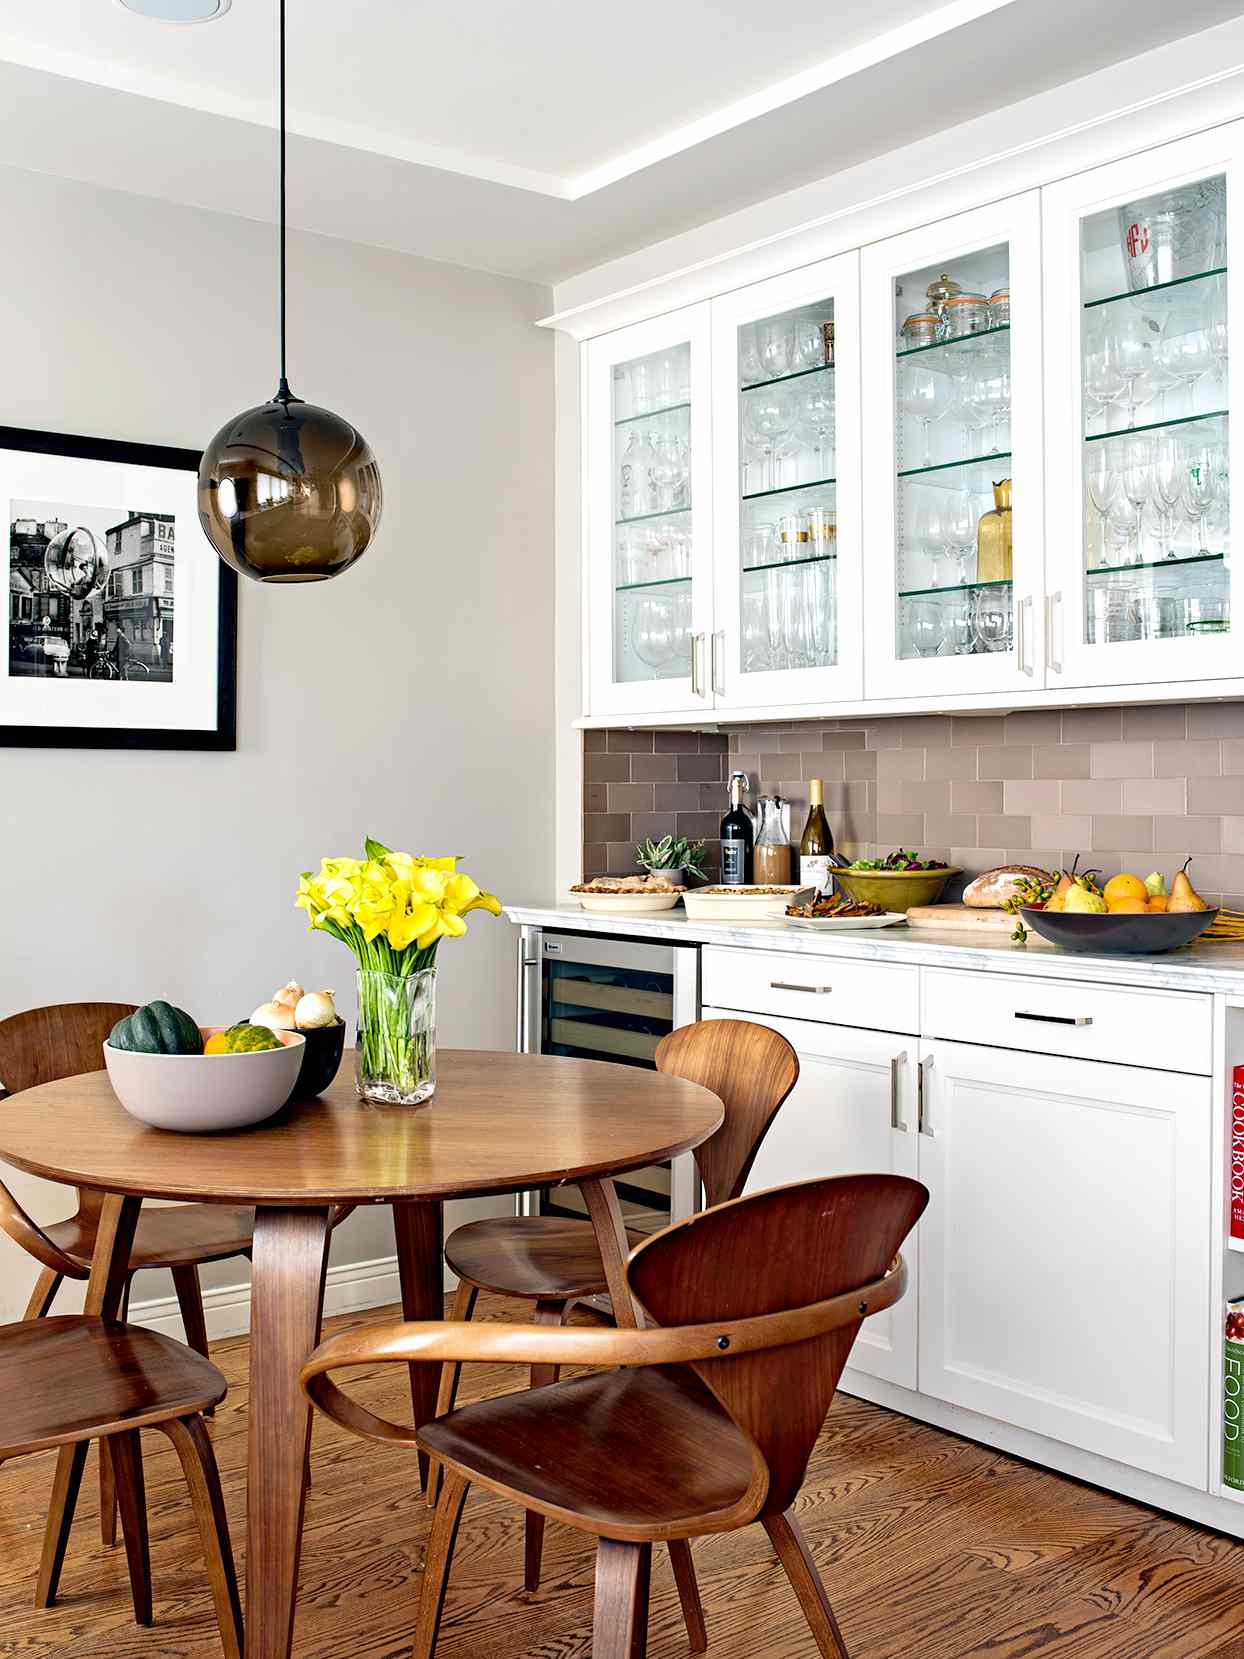 21 Ways To Decorate With Gray Walls And Accessories That Are Anything But Boring Better Homes Gardens - How To Decorate A Dining Room With Grey Walls